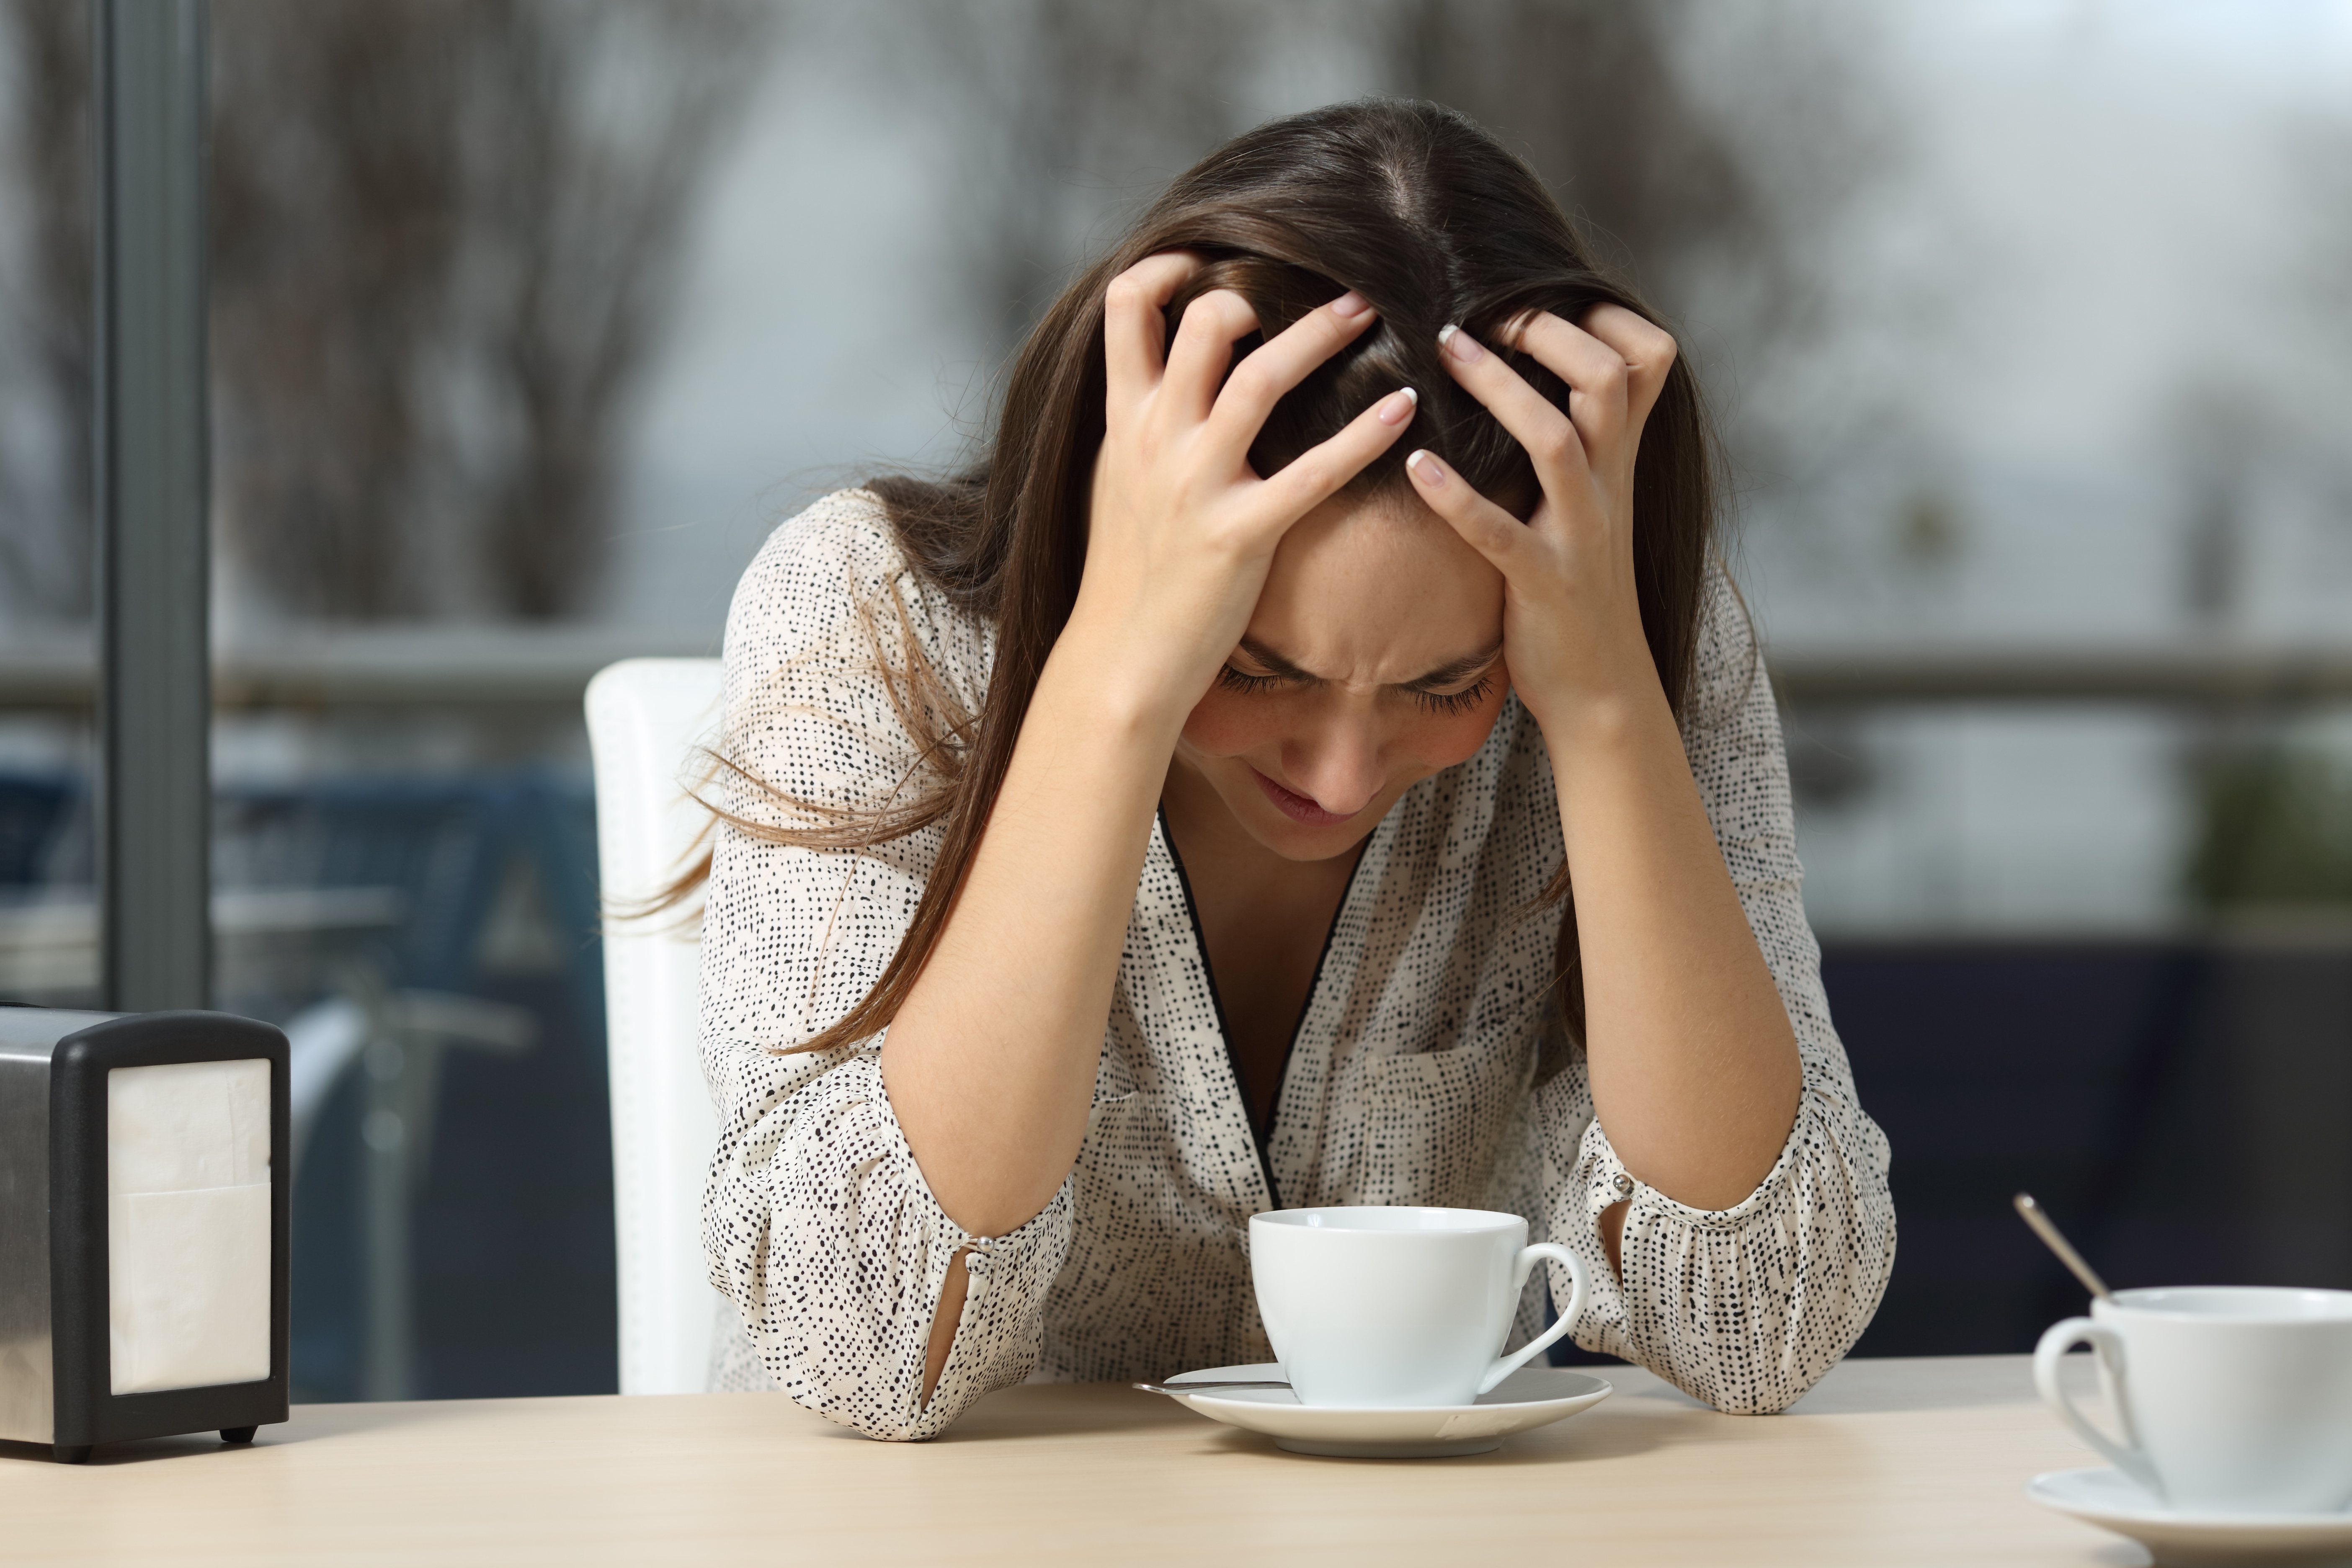 An upset woman sitting at a table | Source: Shutterstock